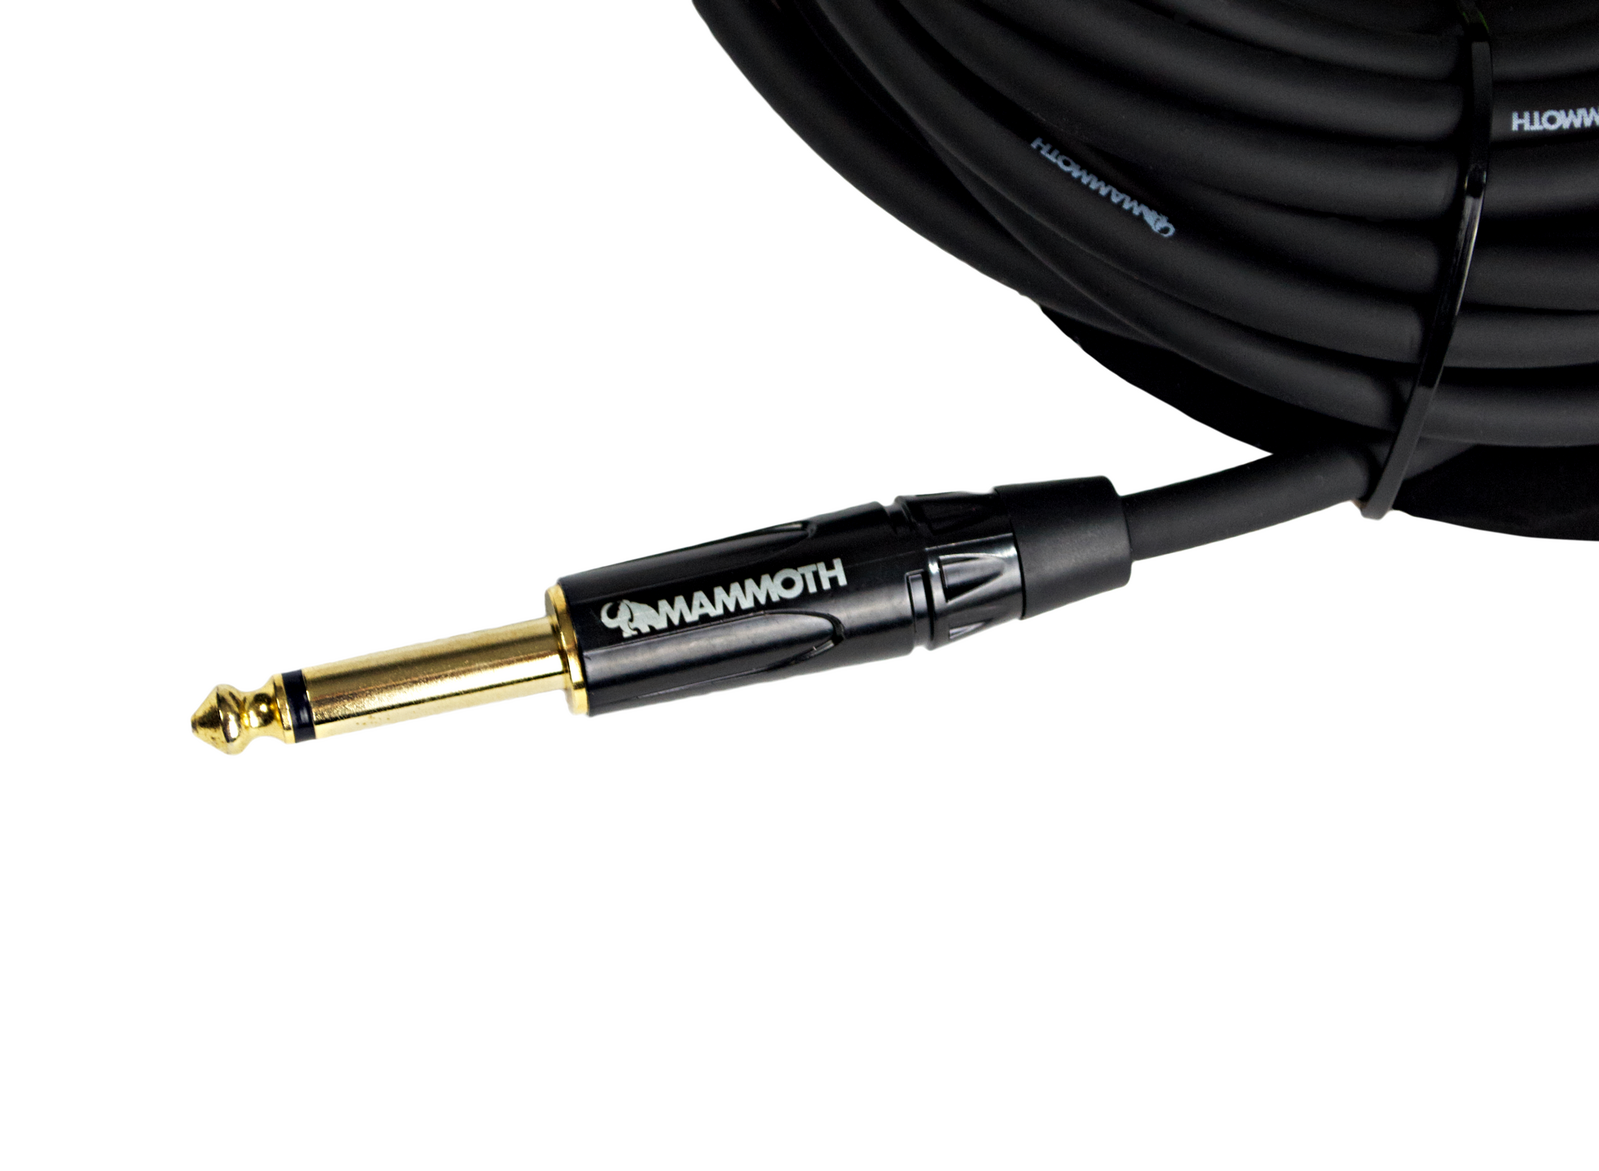 Mammoth Flex G20 20ft Instrument Cable Straight Jack to Straight Jack